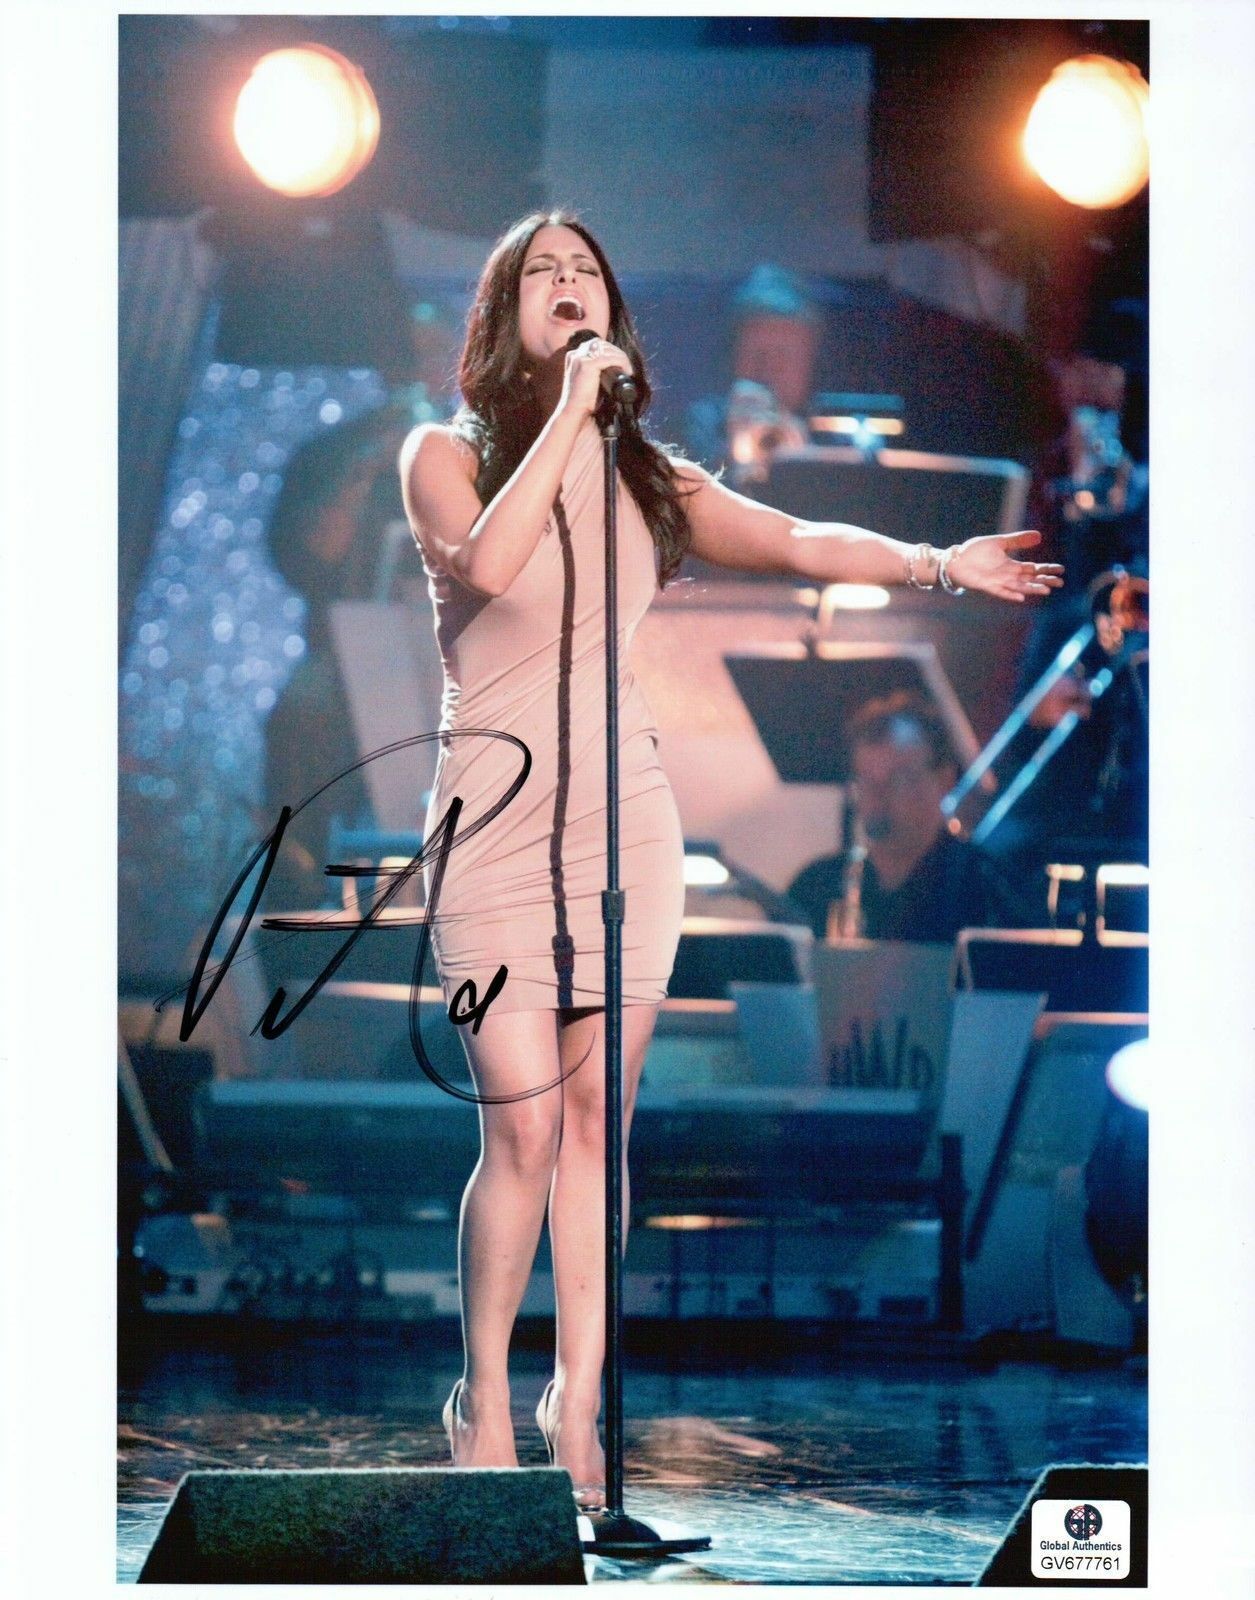 Pia Toscano Signed 8X10 Photo Poster painting Autograph Auto American Idol GV677761